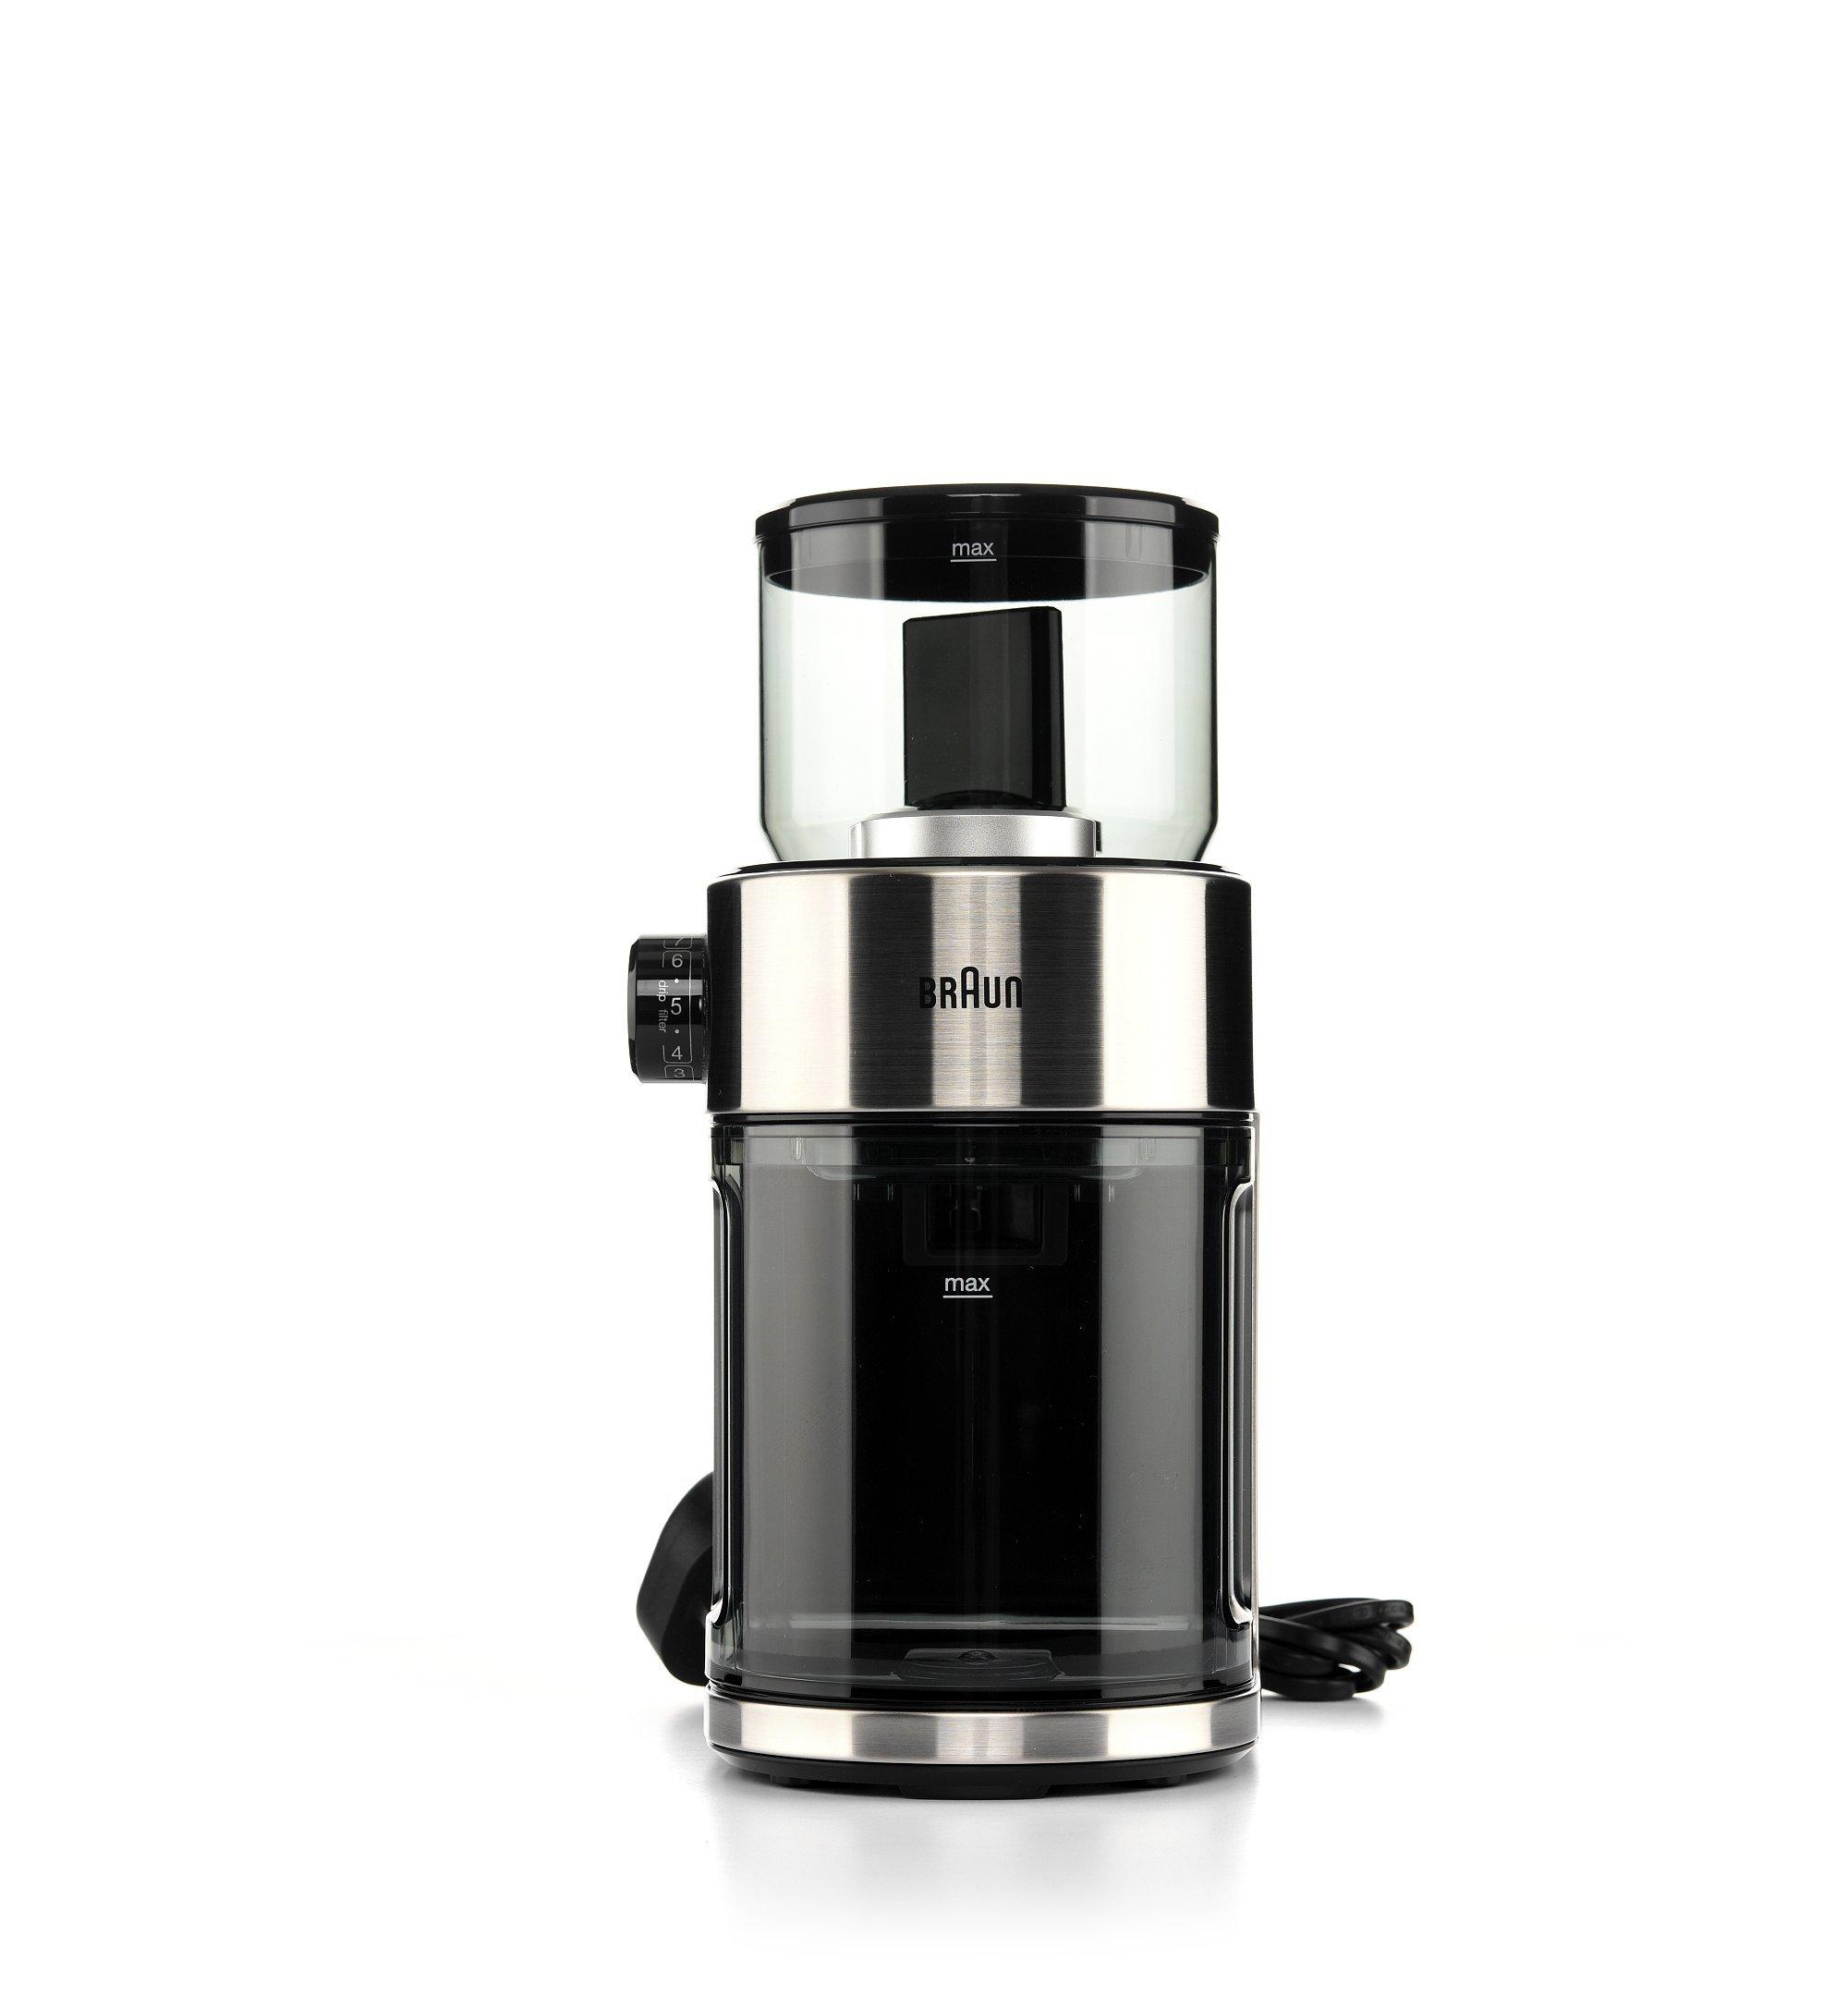 Braun FreshSet 12-Cup Burr Grinder with Removable Container (KG7070)